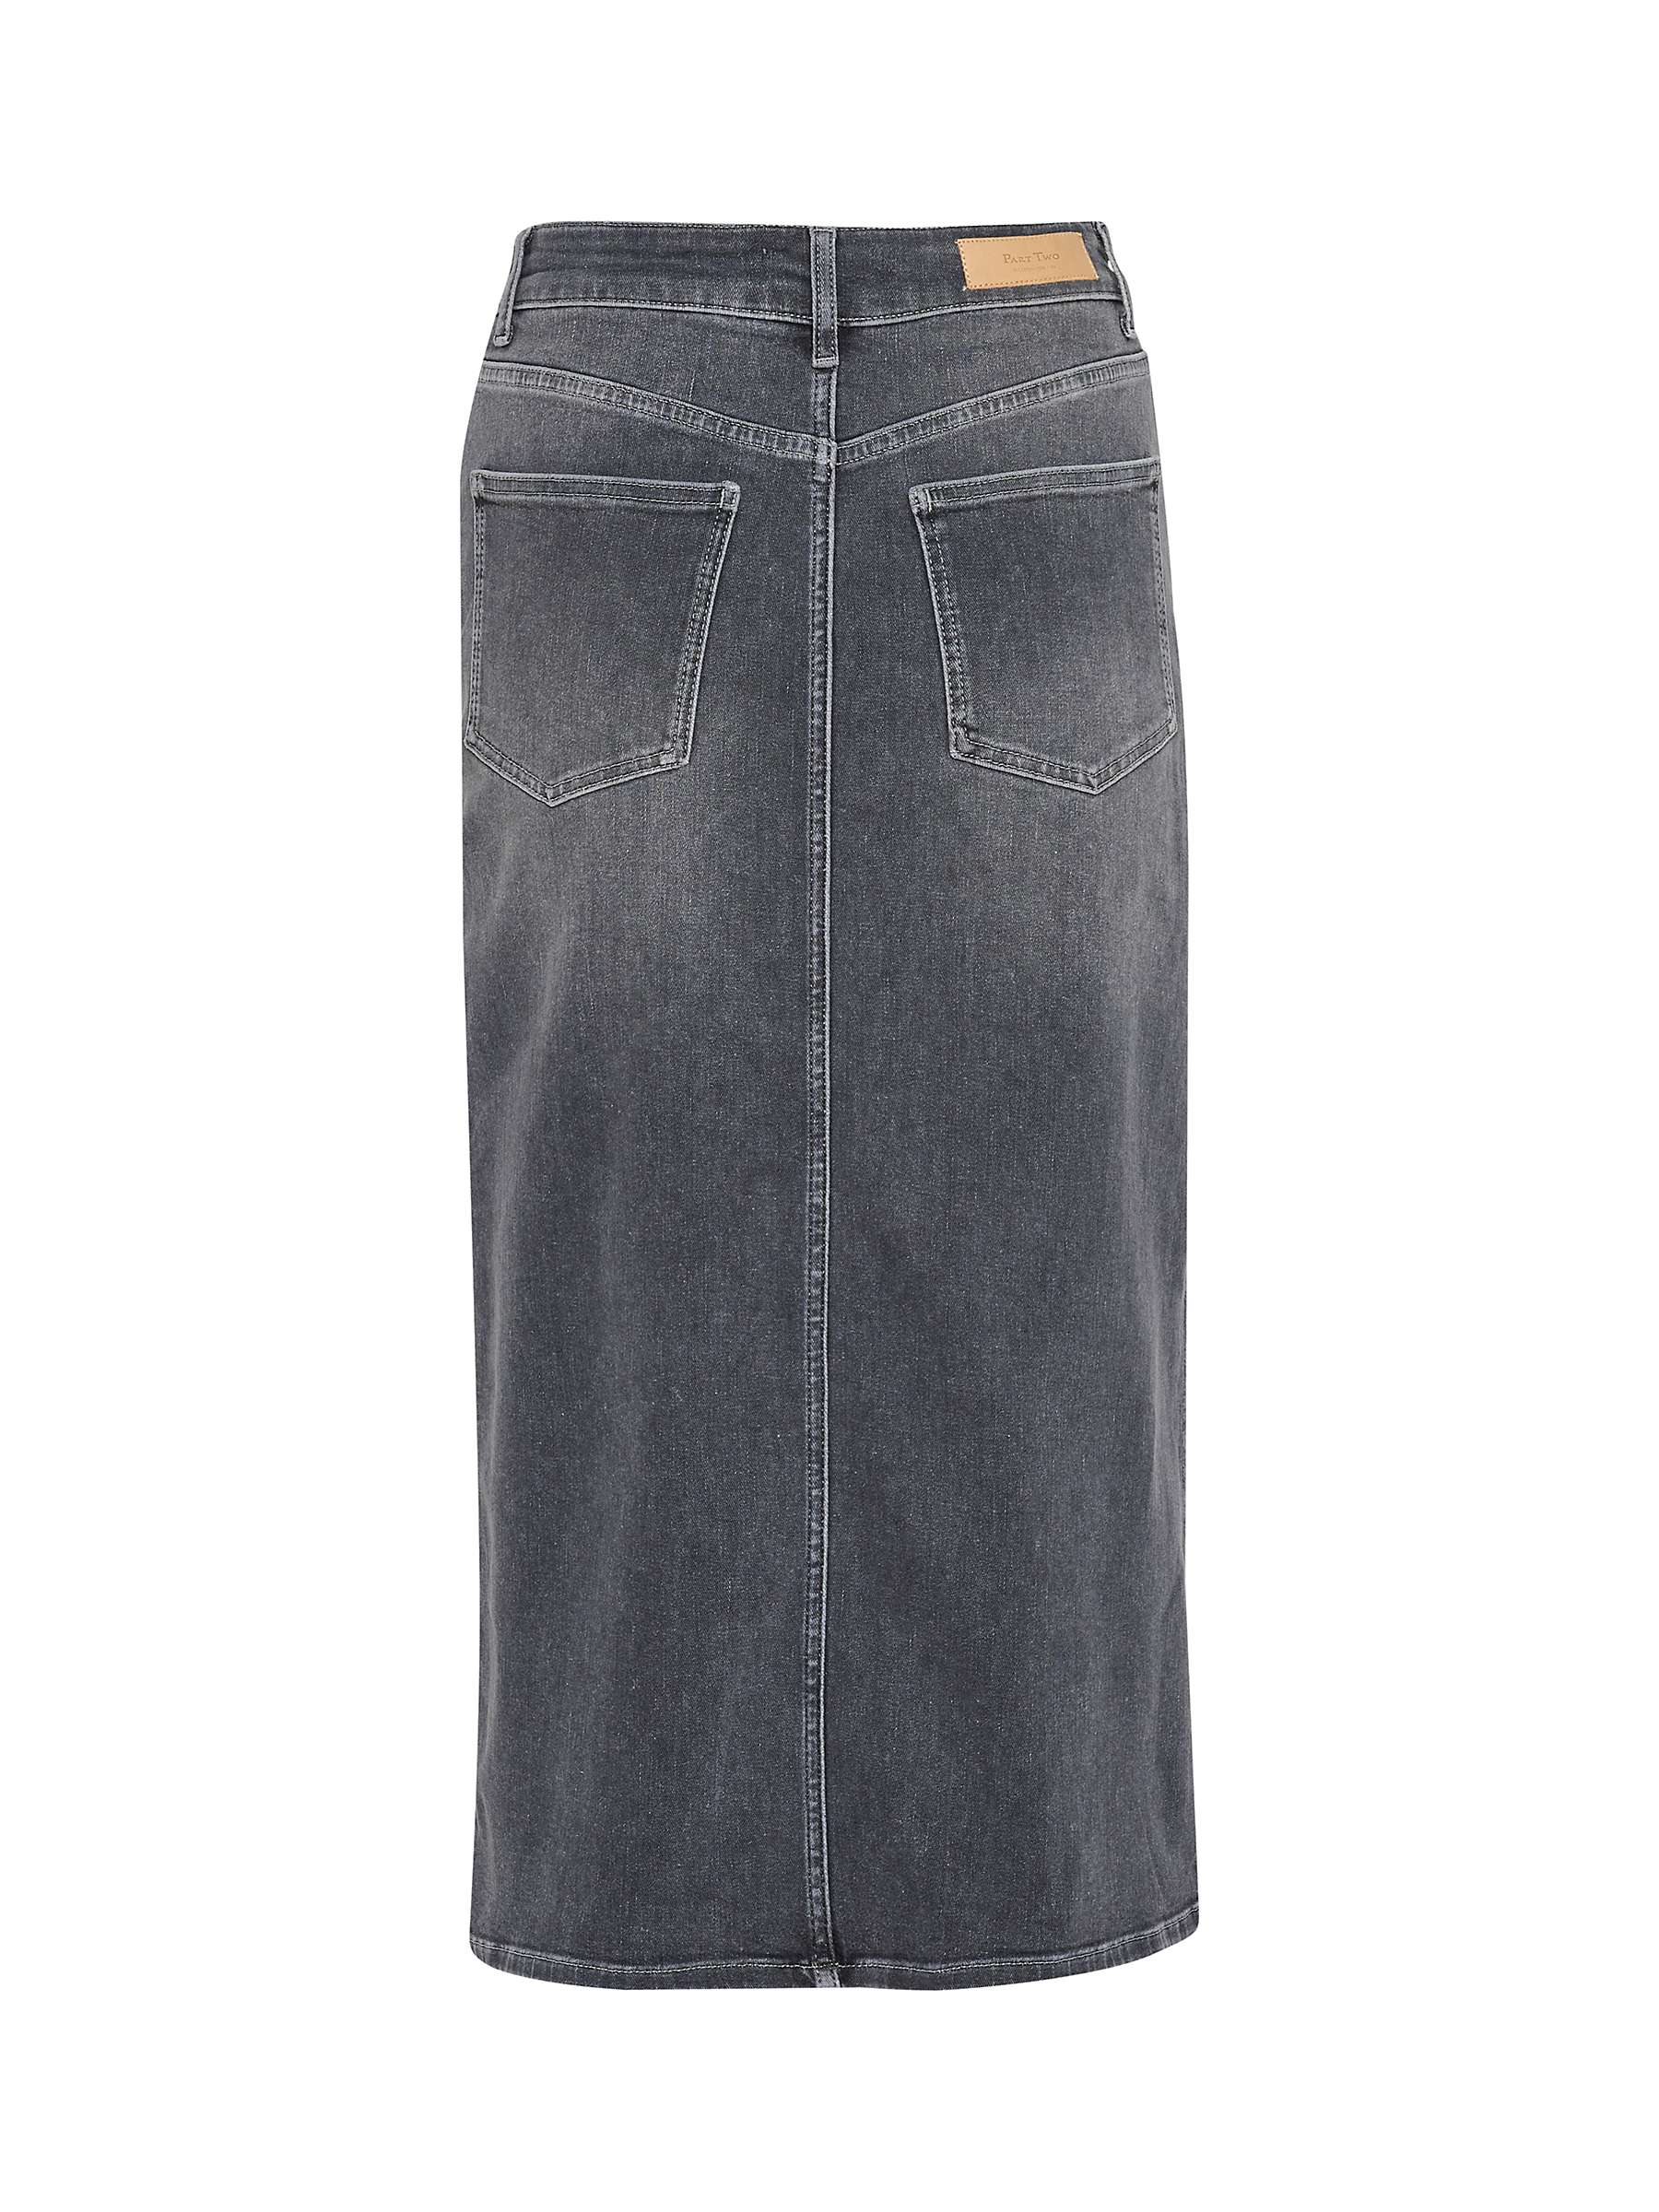 Buy Part Two Dilin Classic Fit Midi Skirt Online at johnlewis.com